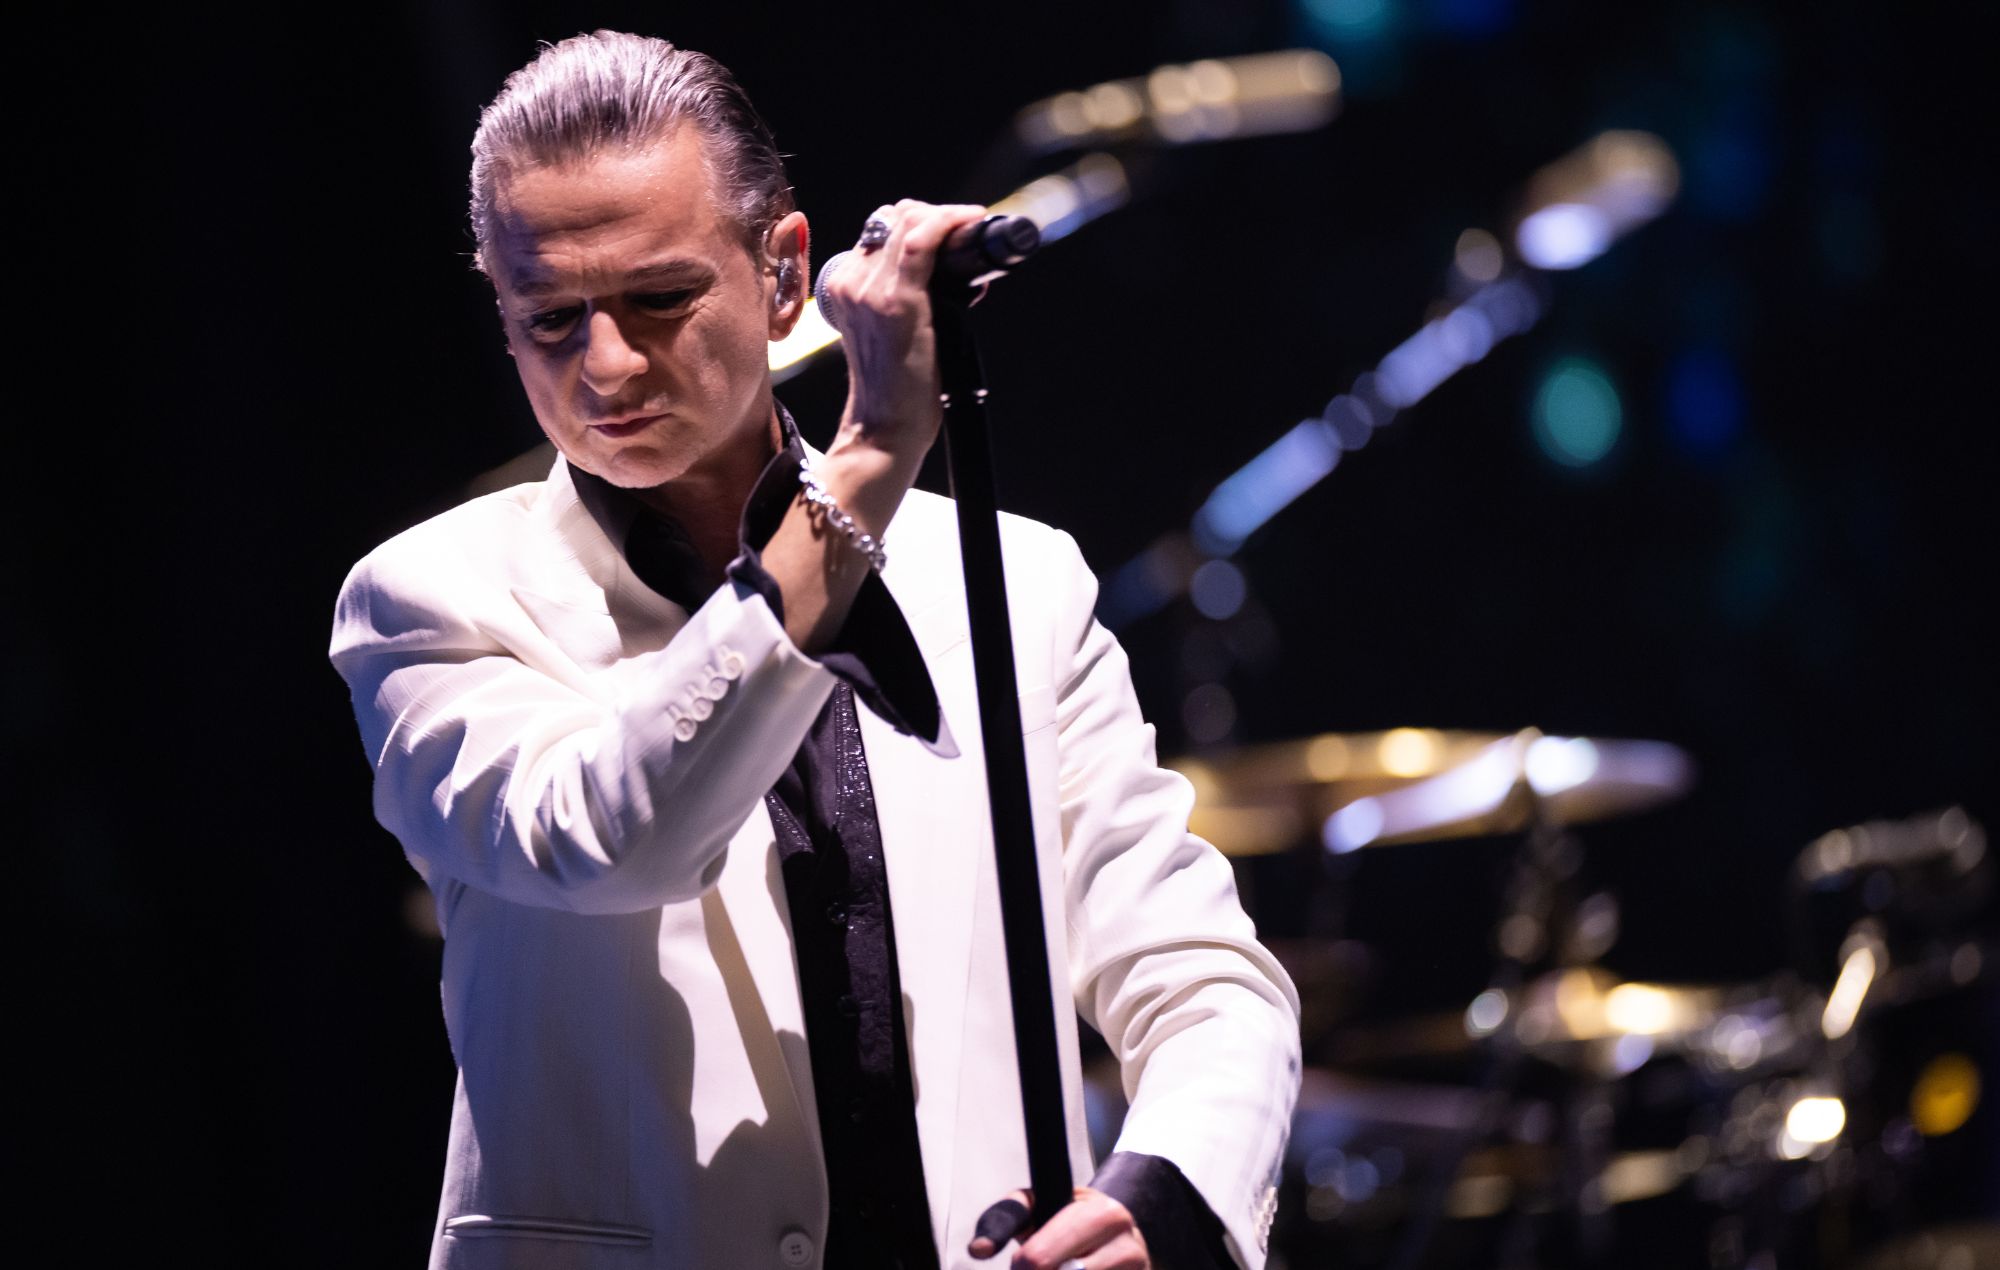 Depeche Mode mark ‘Memento Mori’ tour finale with epic ‘People Are Good’ video and remix package